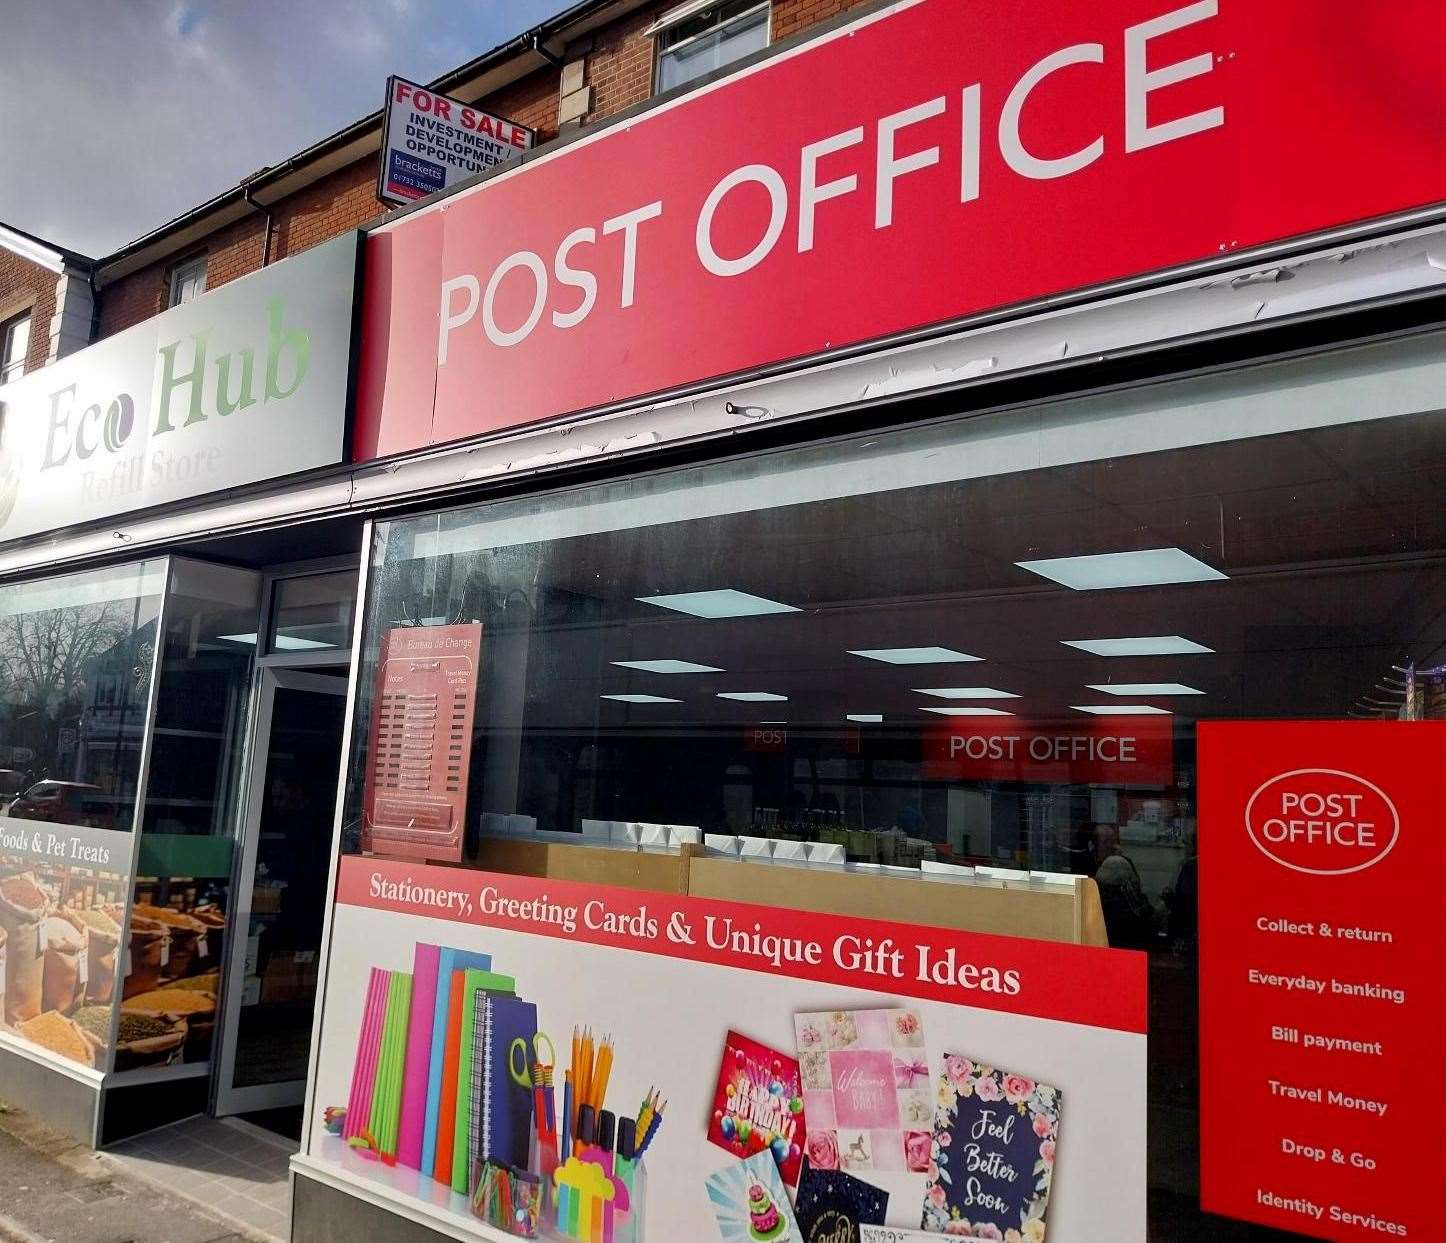 More than 700 postmasters were given criminal convictions after faulty accounting software used on Post Office computers made it appear as though money was missing from their shops